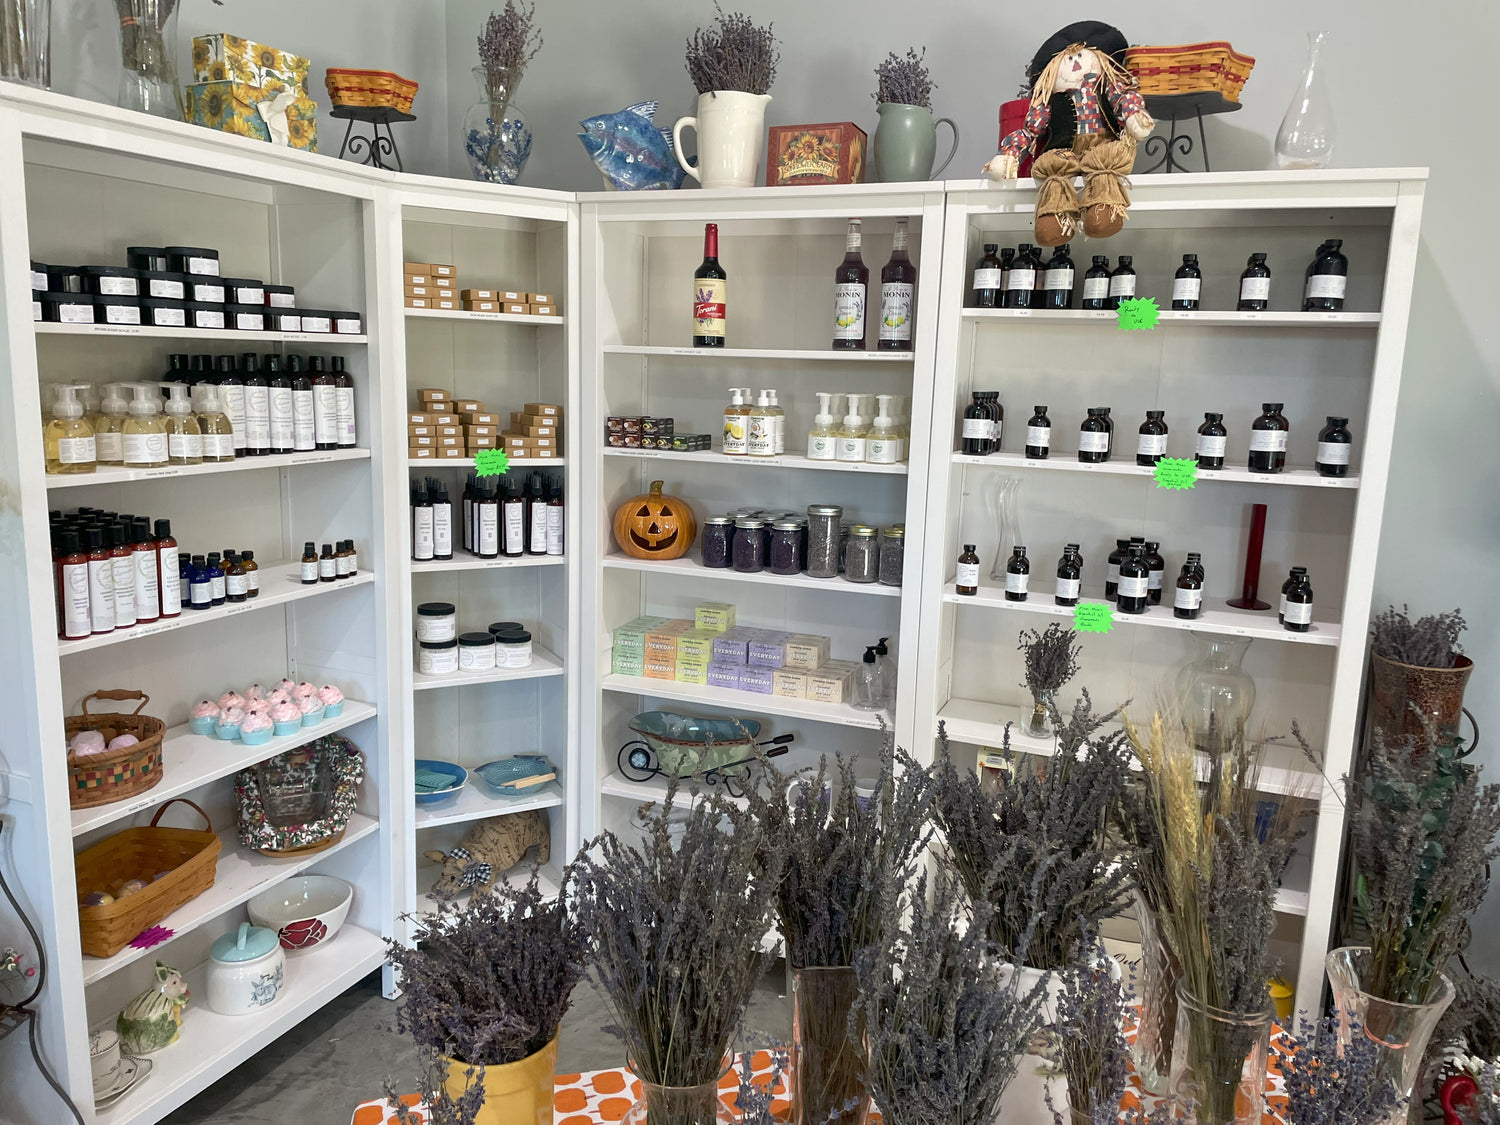 Our on-farm store, showing our dried lavender and many of our lavender products.